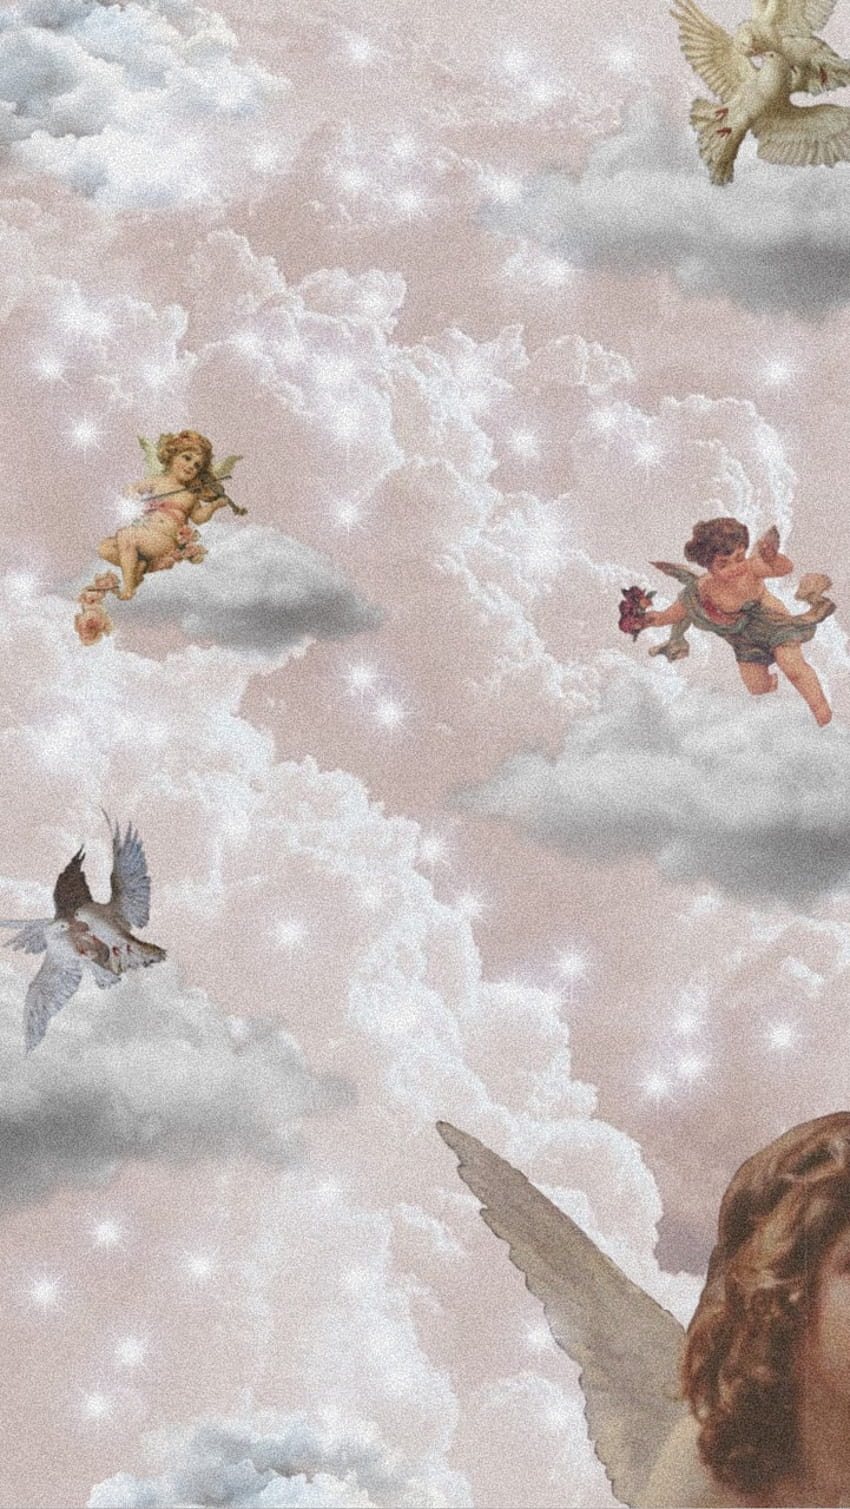 A picture of angels flying in the sky - Cupid